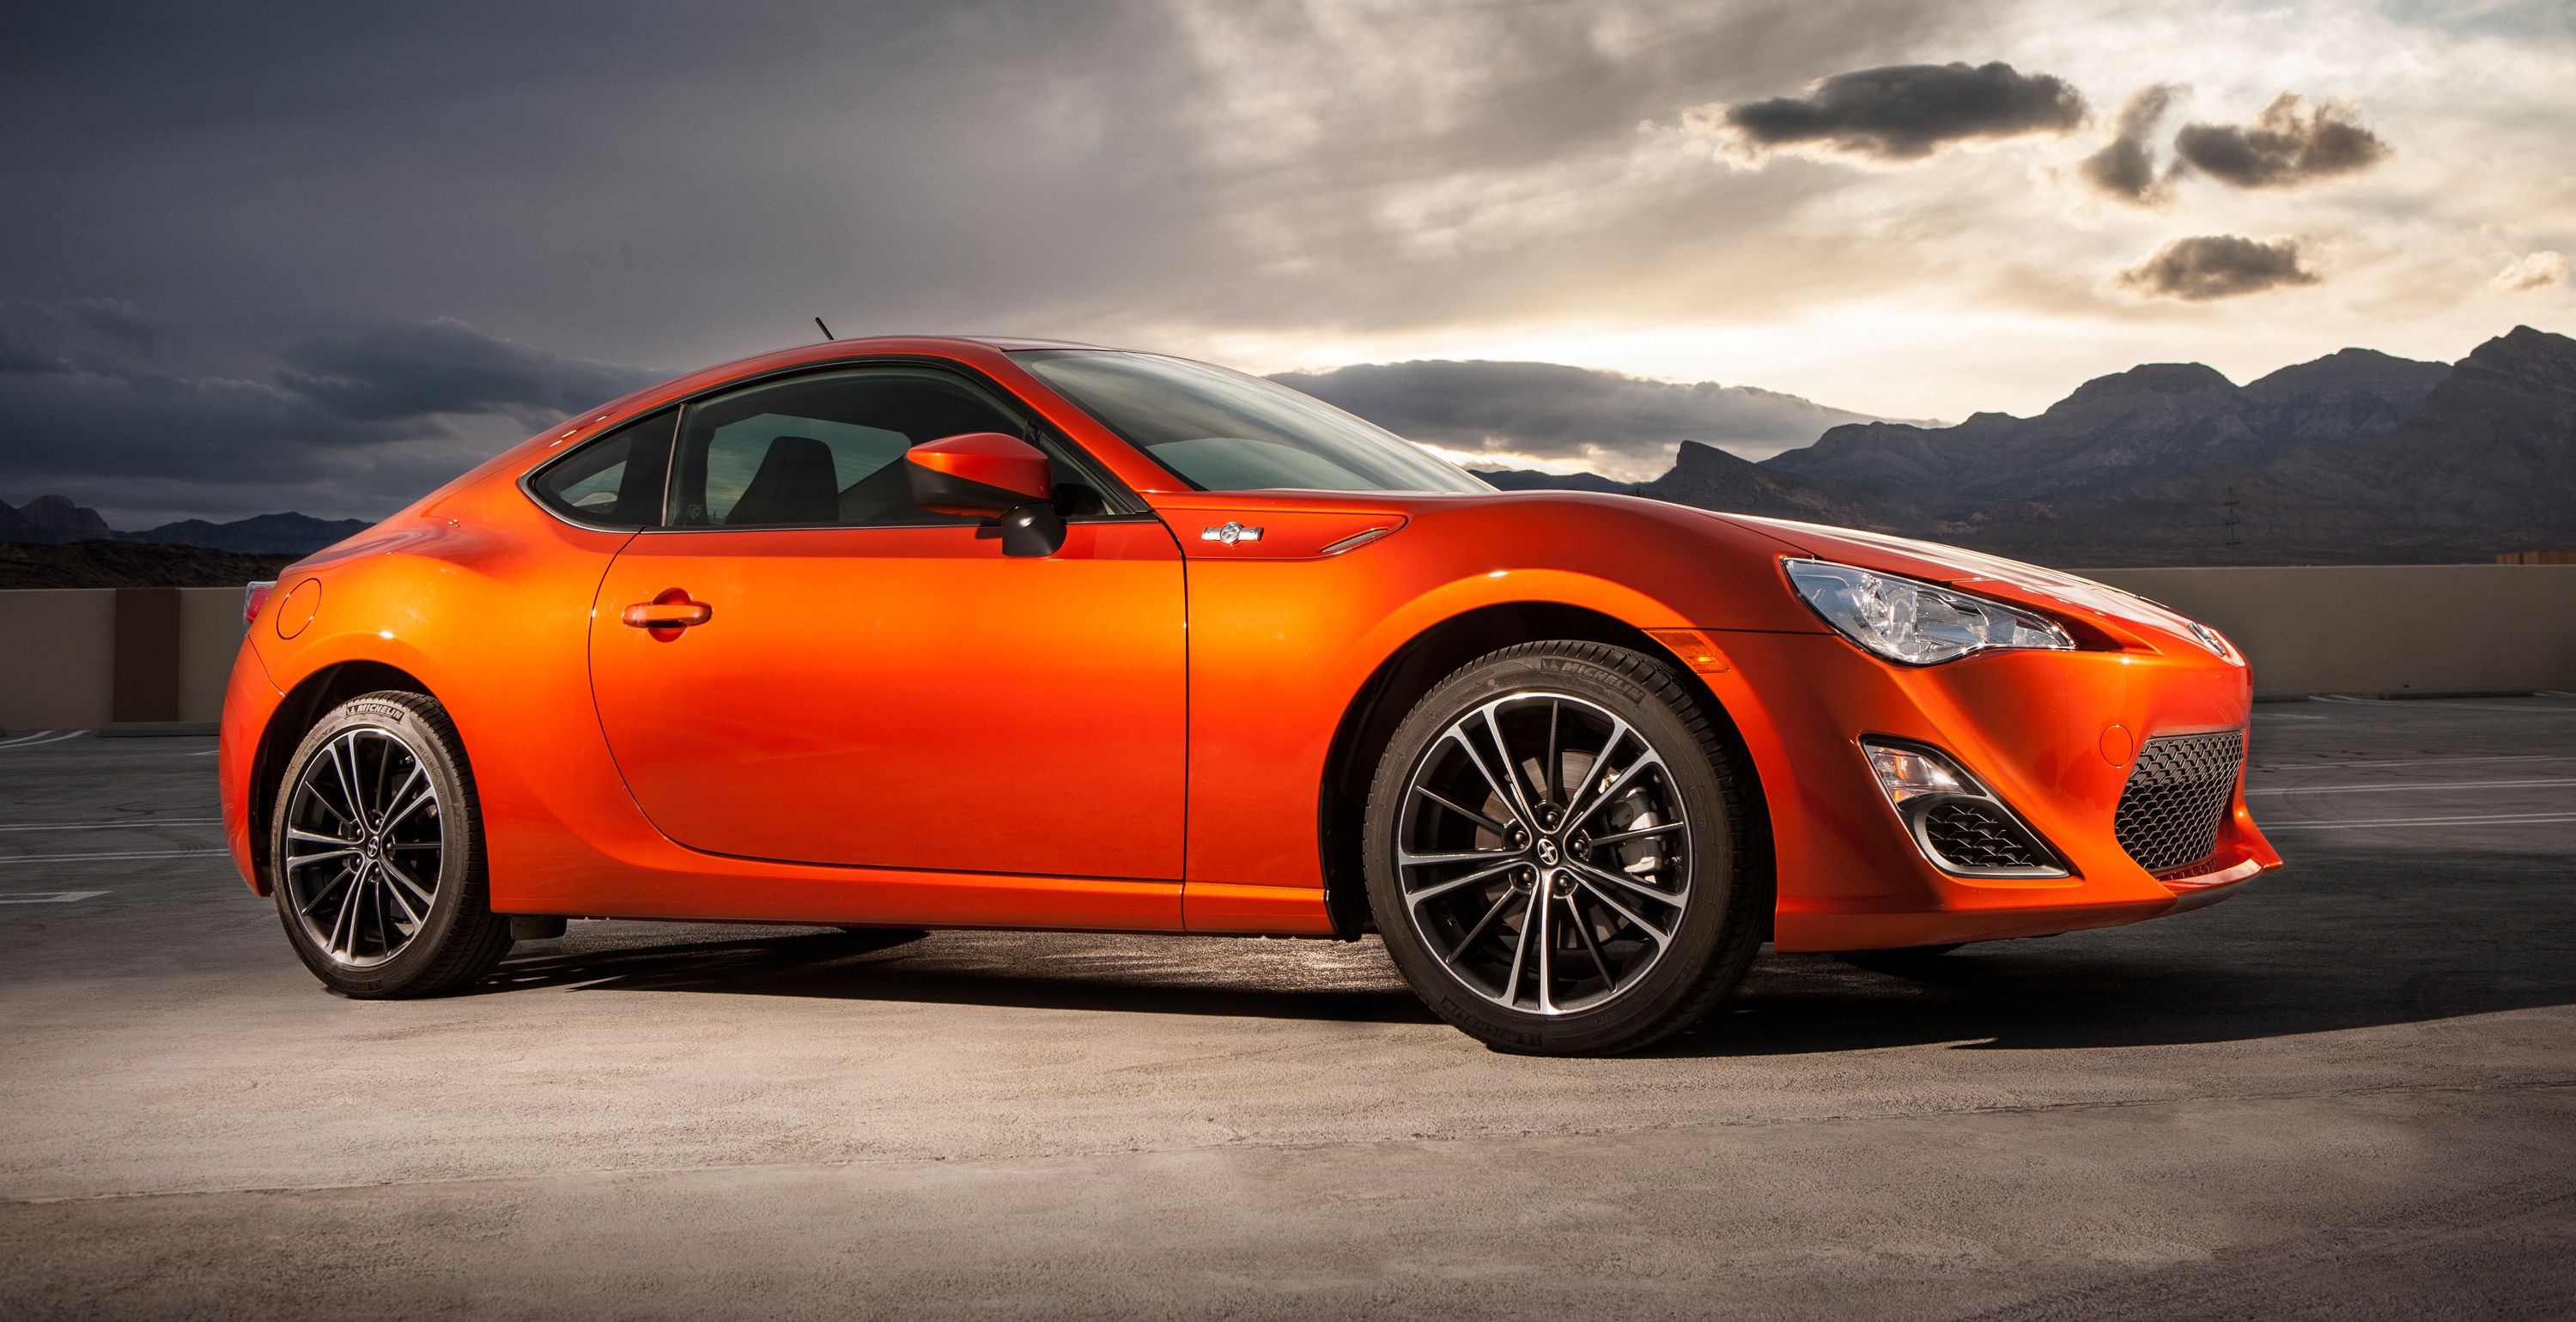 A 2013 Scion FR-S parked in front the sun setting behind mountains